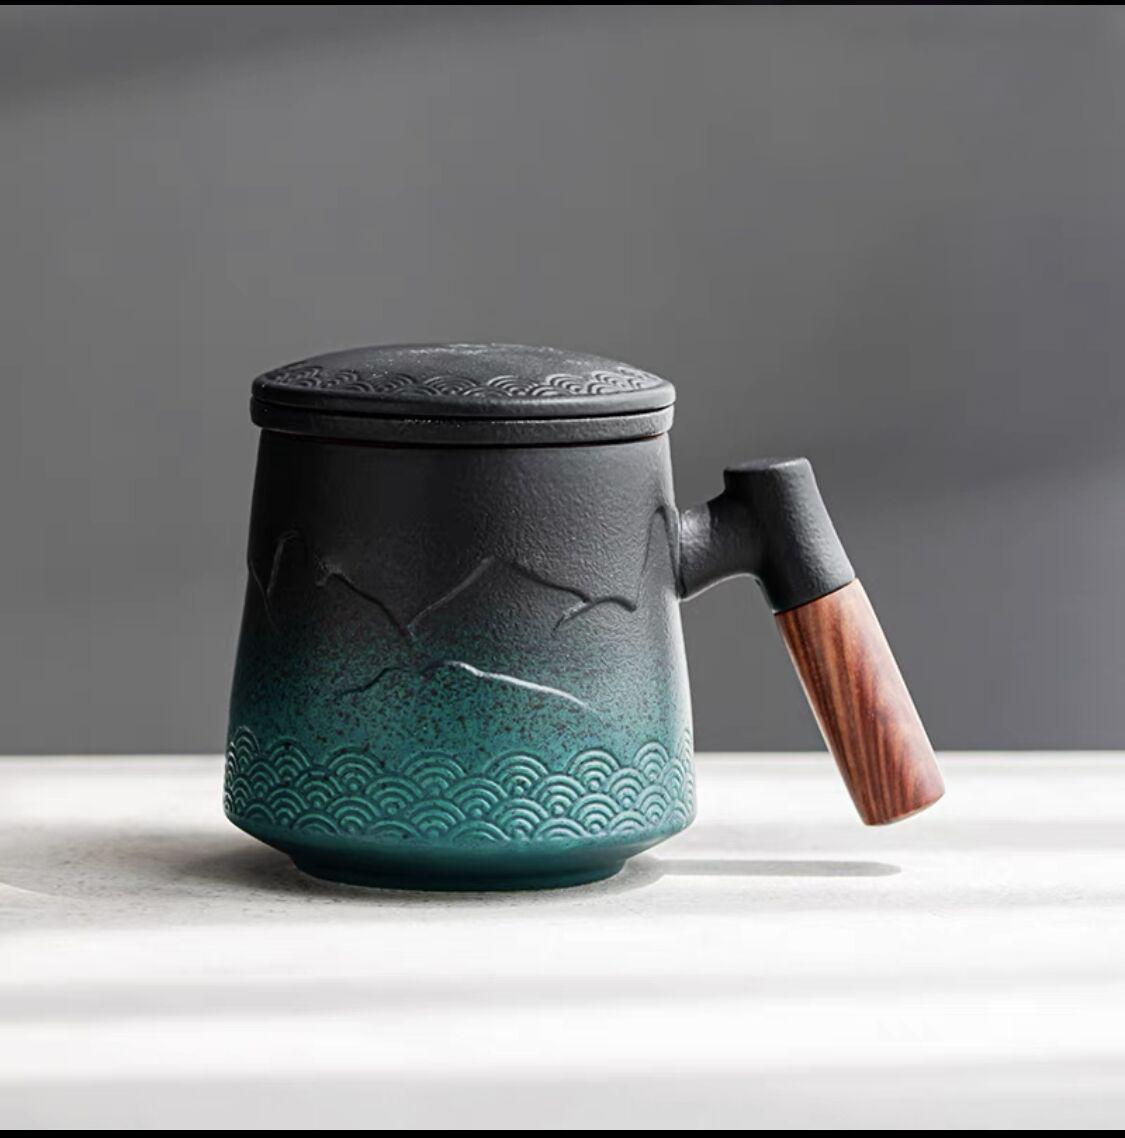 “Mountain” - Handmade Embossed Ceramic Tea Mug With Wooden Handle and Removable Infuser-TeaTsy - For A Good Cup of Tea